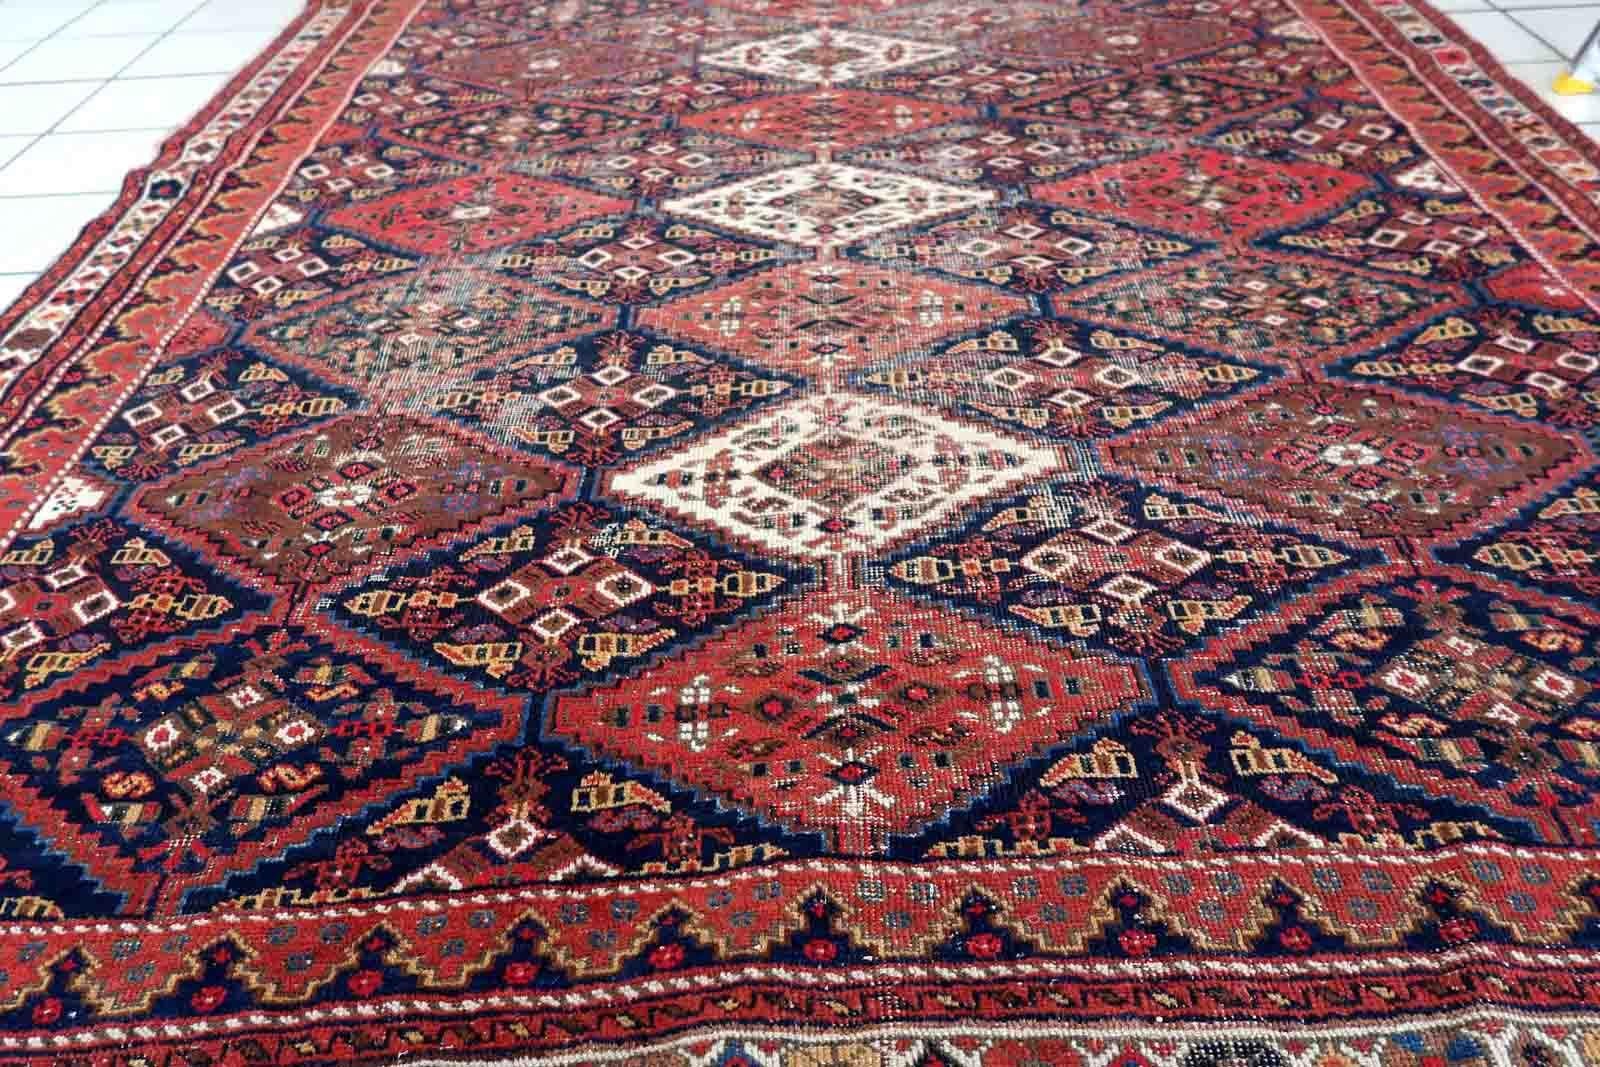 Handmade antique rug from Afshar region. The rug is from the beginning of 20th century in distressed condition.

-condition: distressed,

-circa: 1910s,

-size: 5.5' x 6.8' (170cm x 208cm),

-material: wool,

-country of origin: Middle